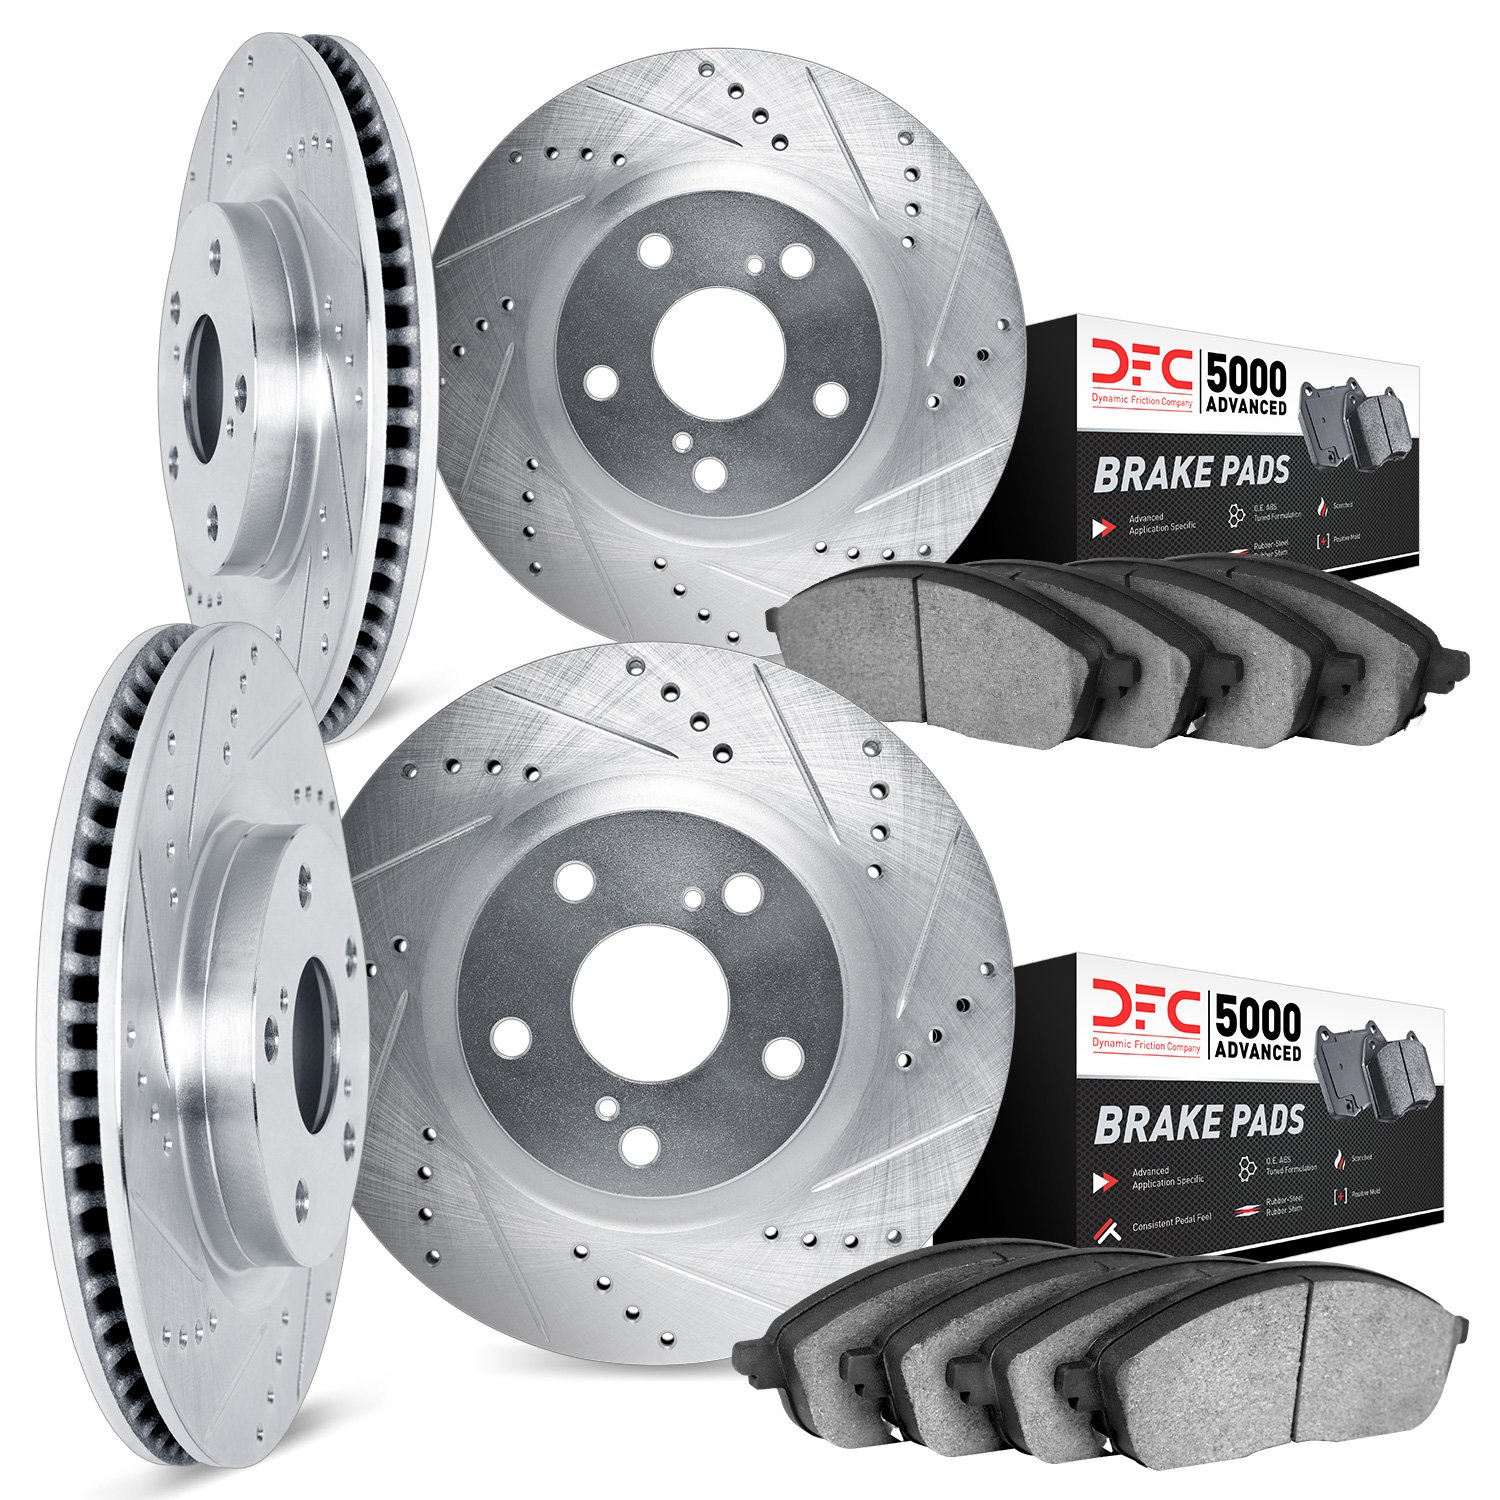 7504-76120 Drilled/Slotted Brake Rotors w/5000 Advanced Brake Pads Kit [Silver], 1986-1992 Lexus/Toyota/Scion, Position: Front a